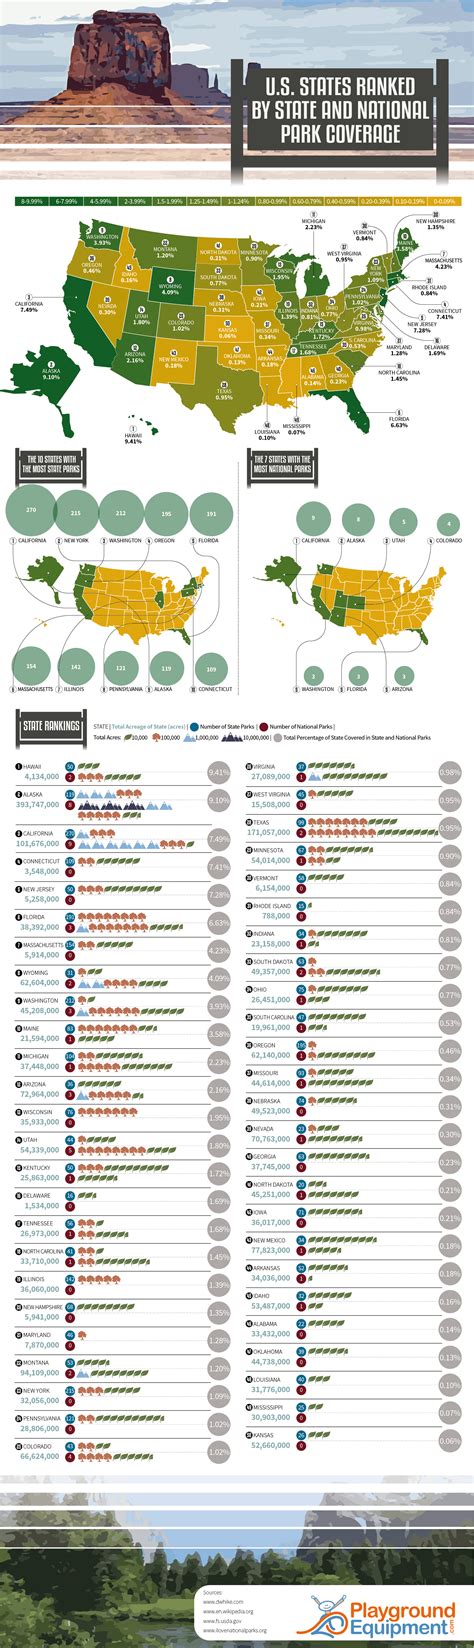 Us States Ranked By State And National Park Coverage